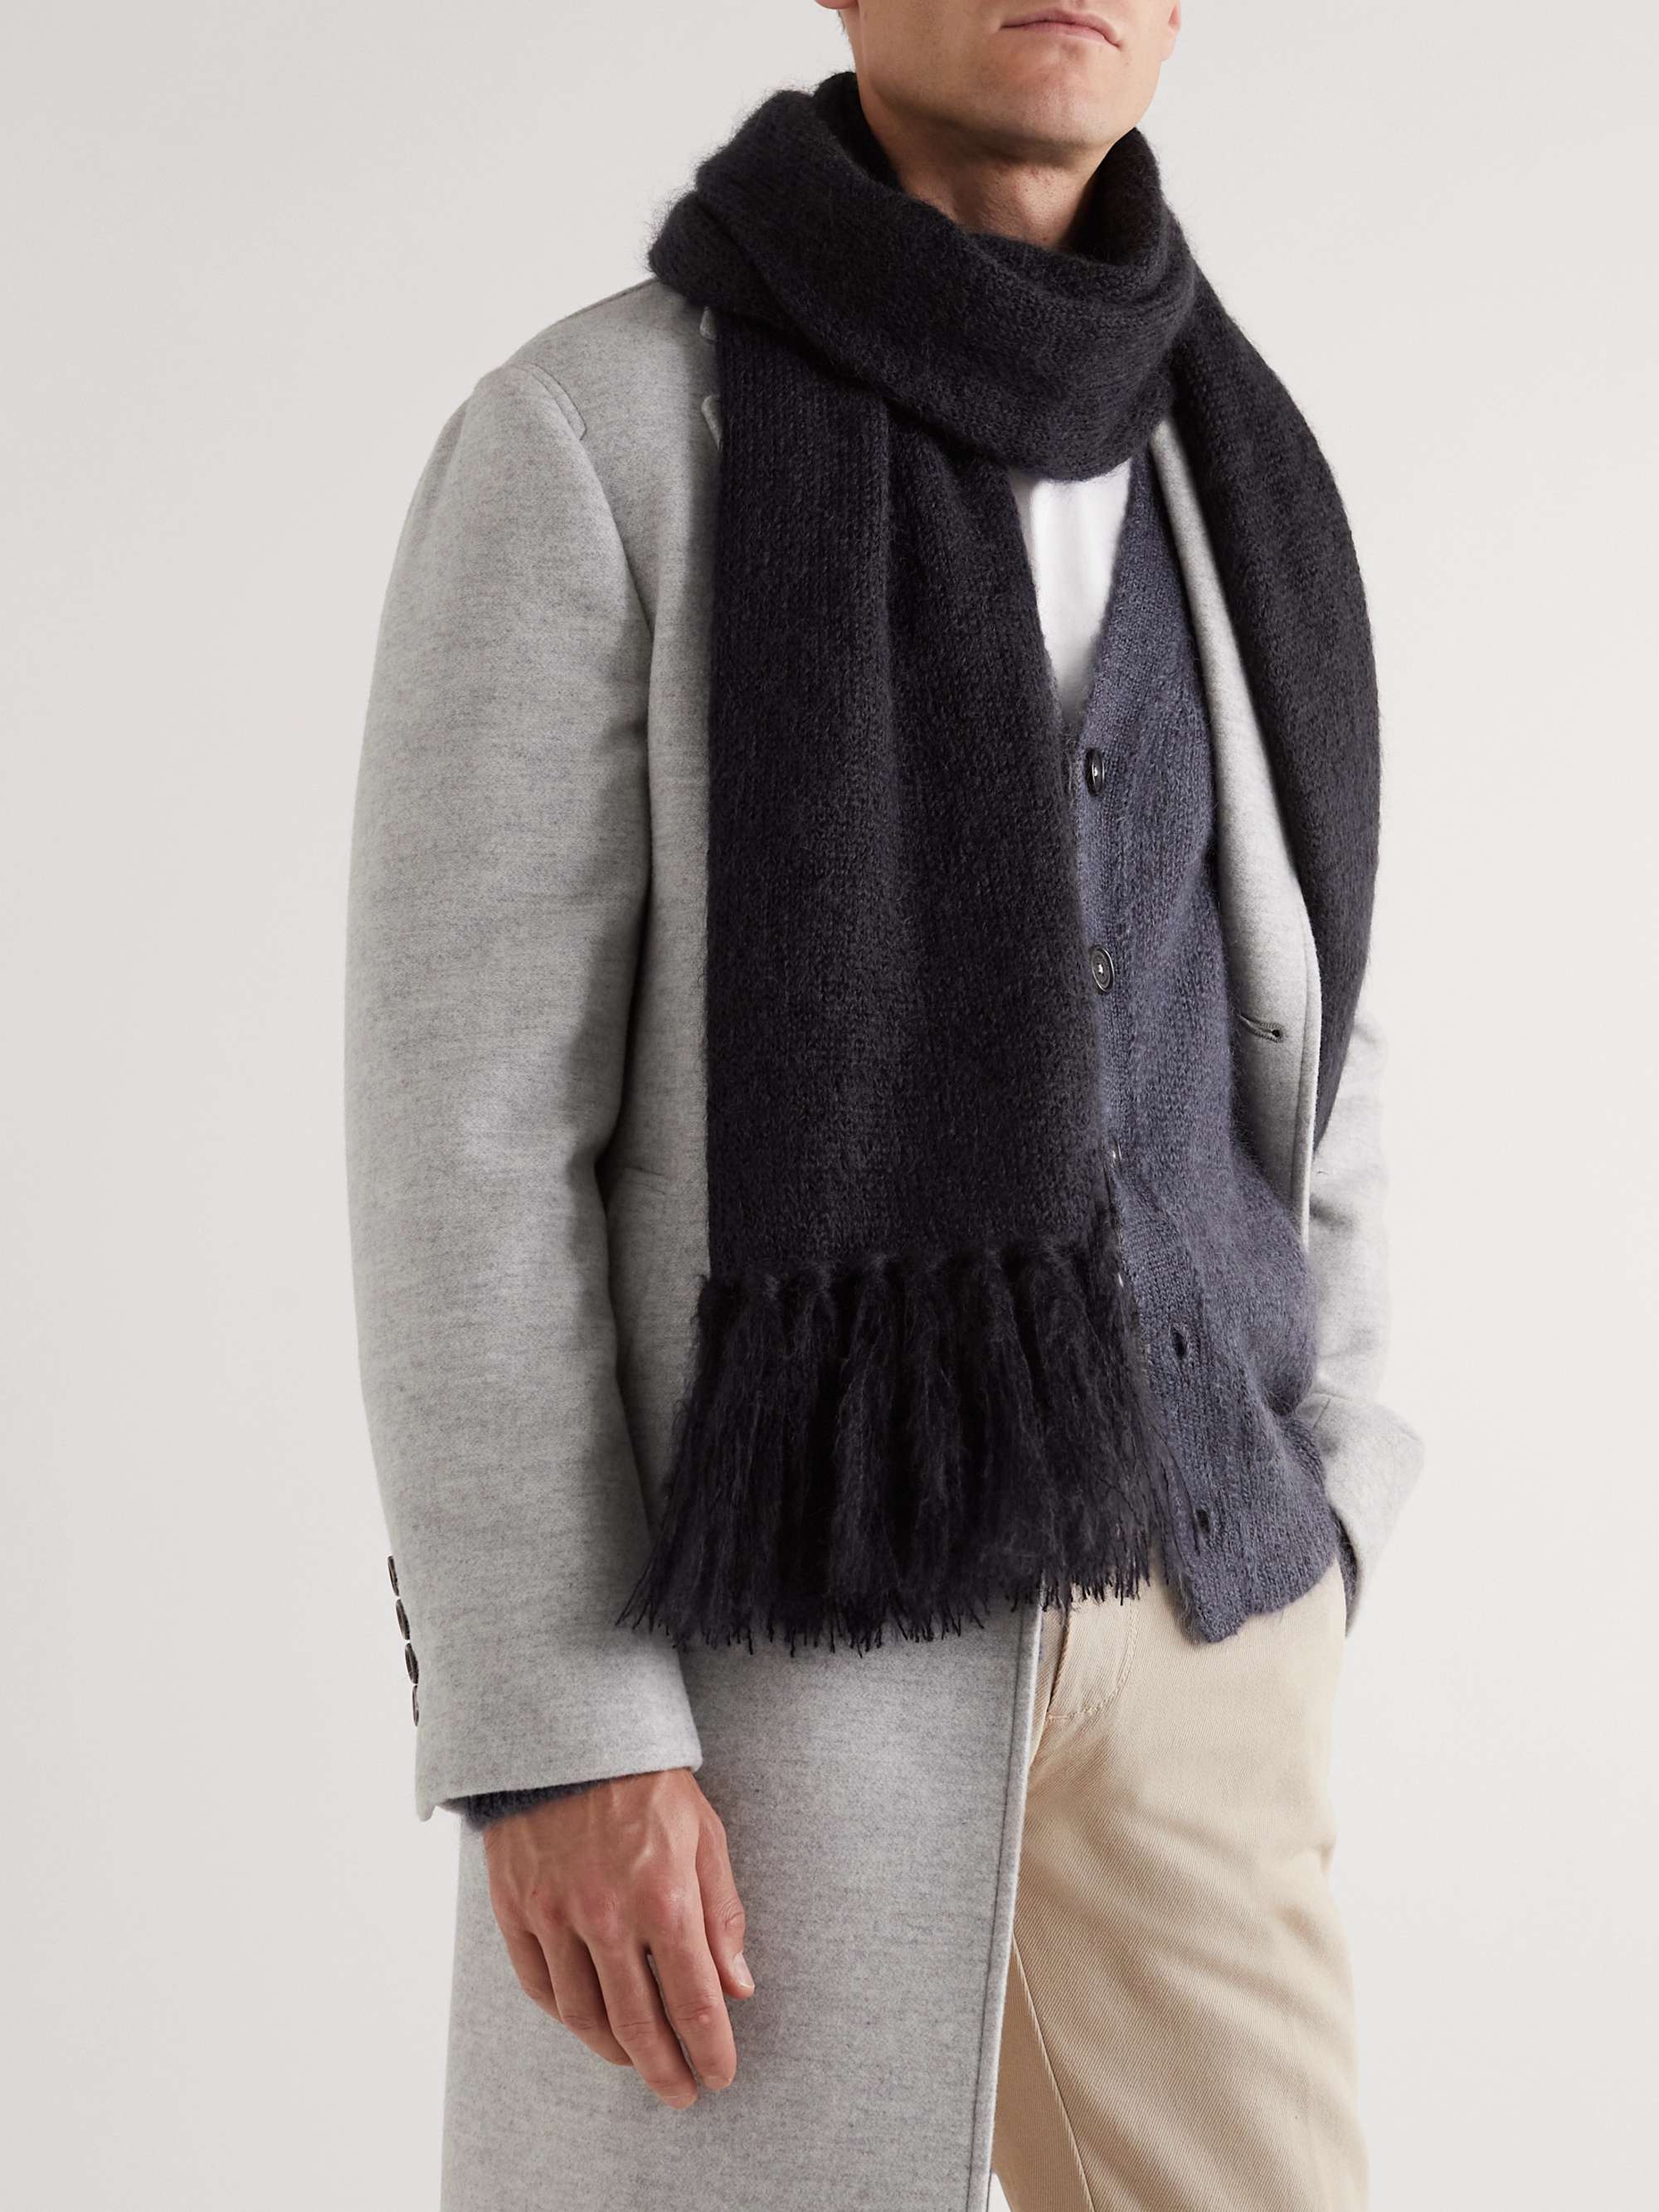 MASSIMO ALBA Fringed Mohair and Silk-Blend Scarf